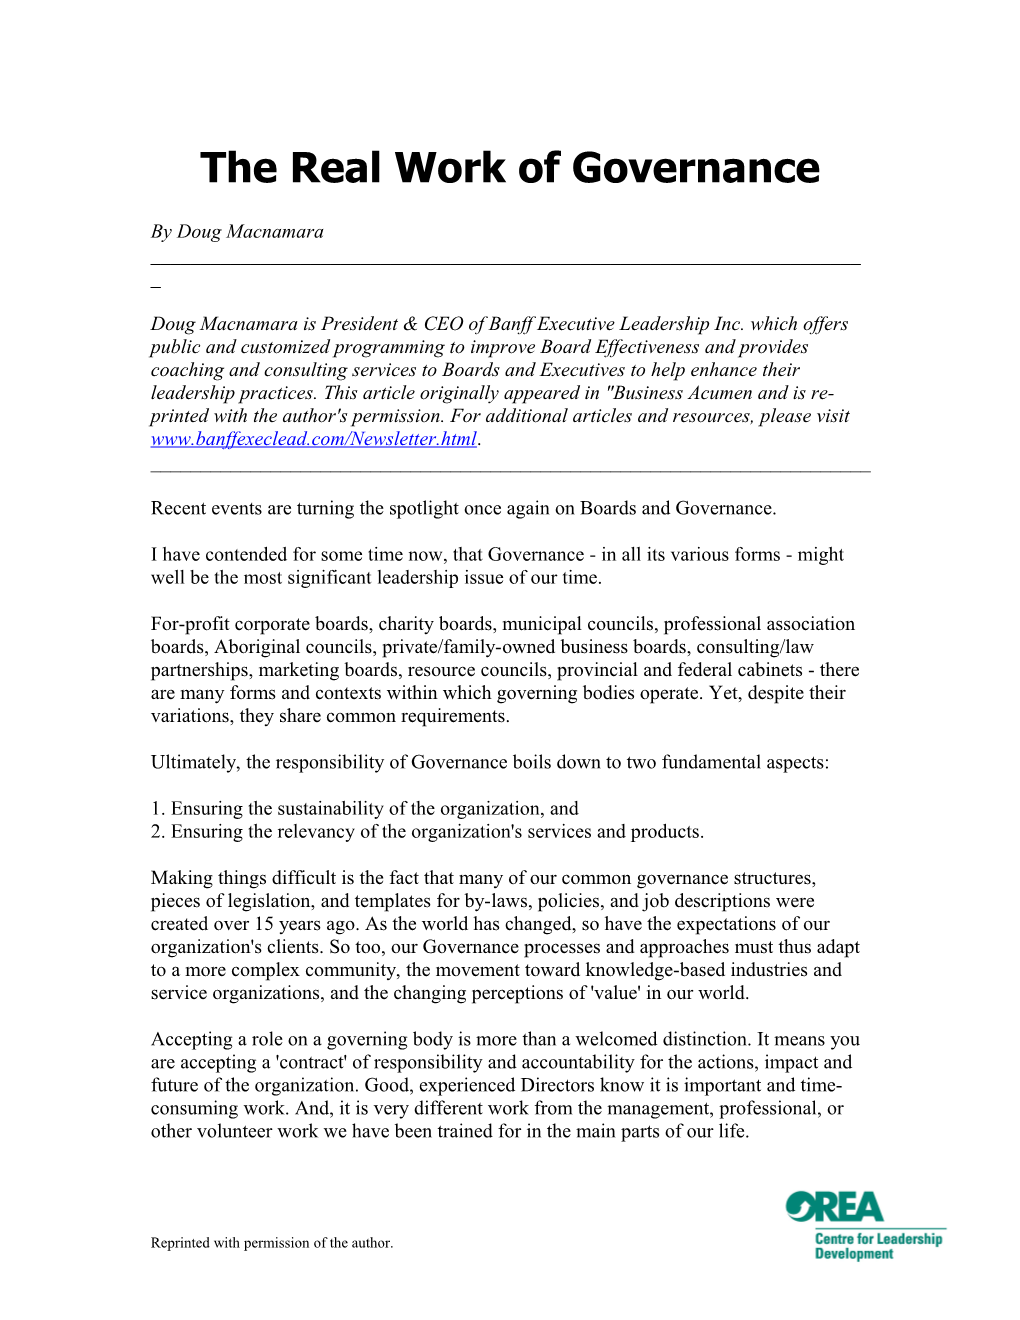 The Real Work of Governance